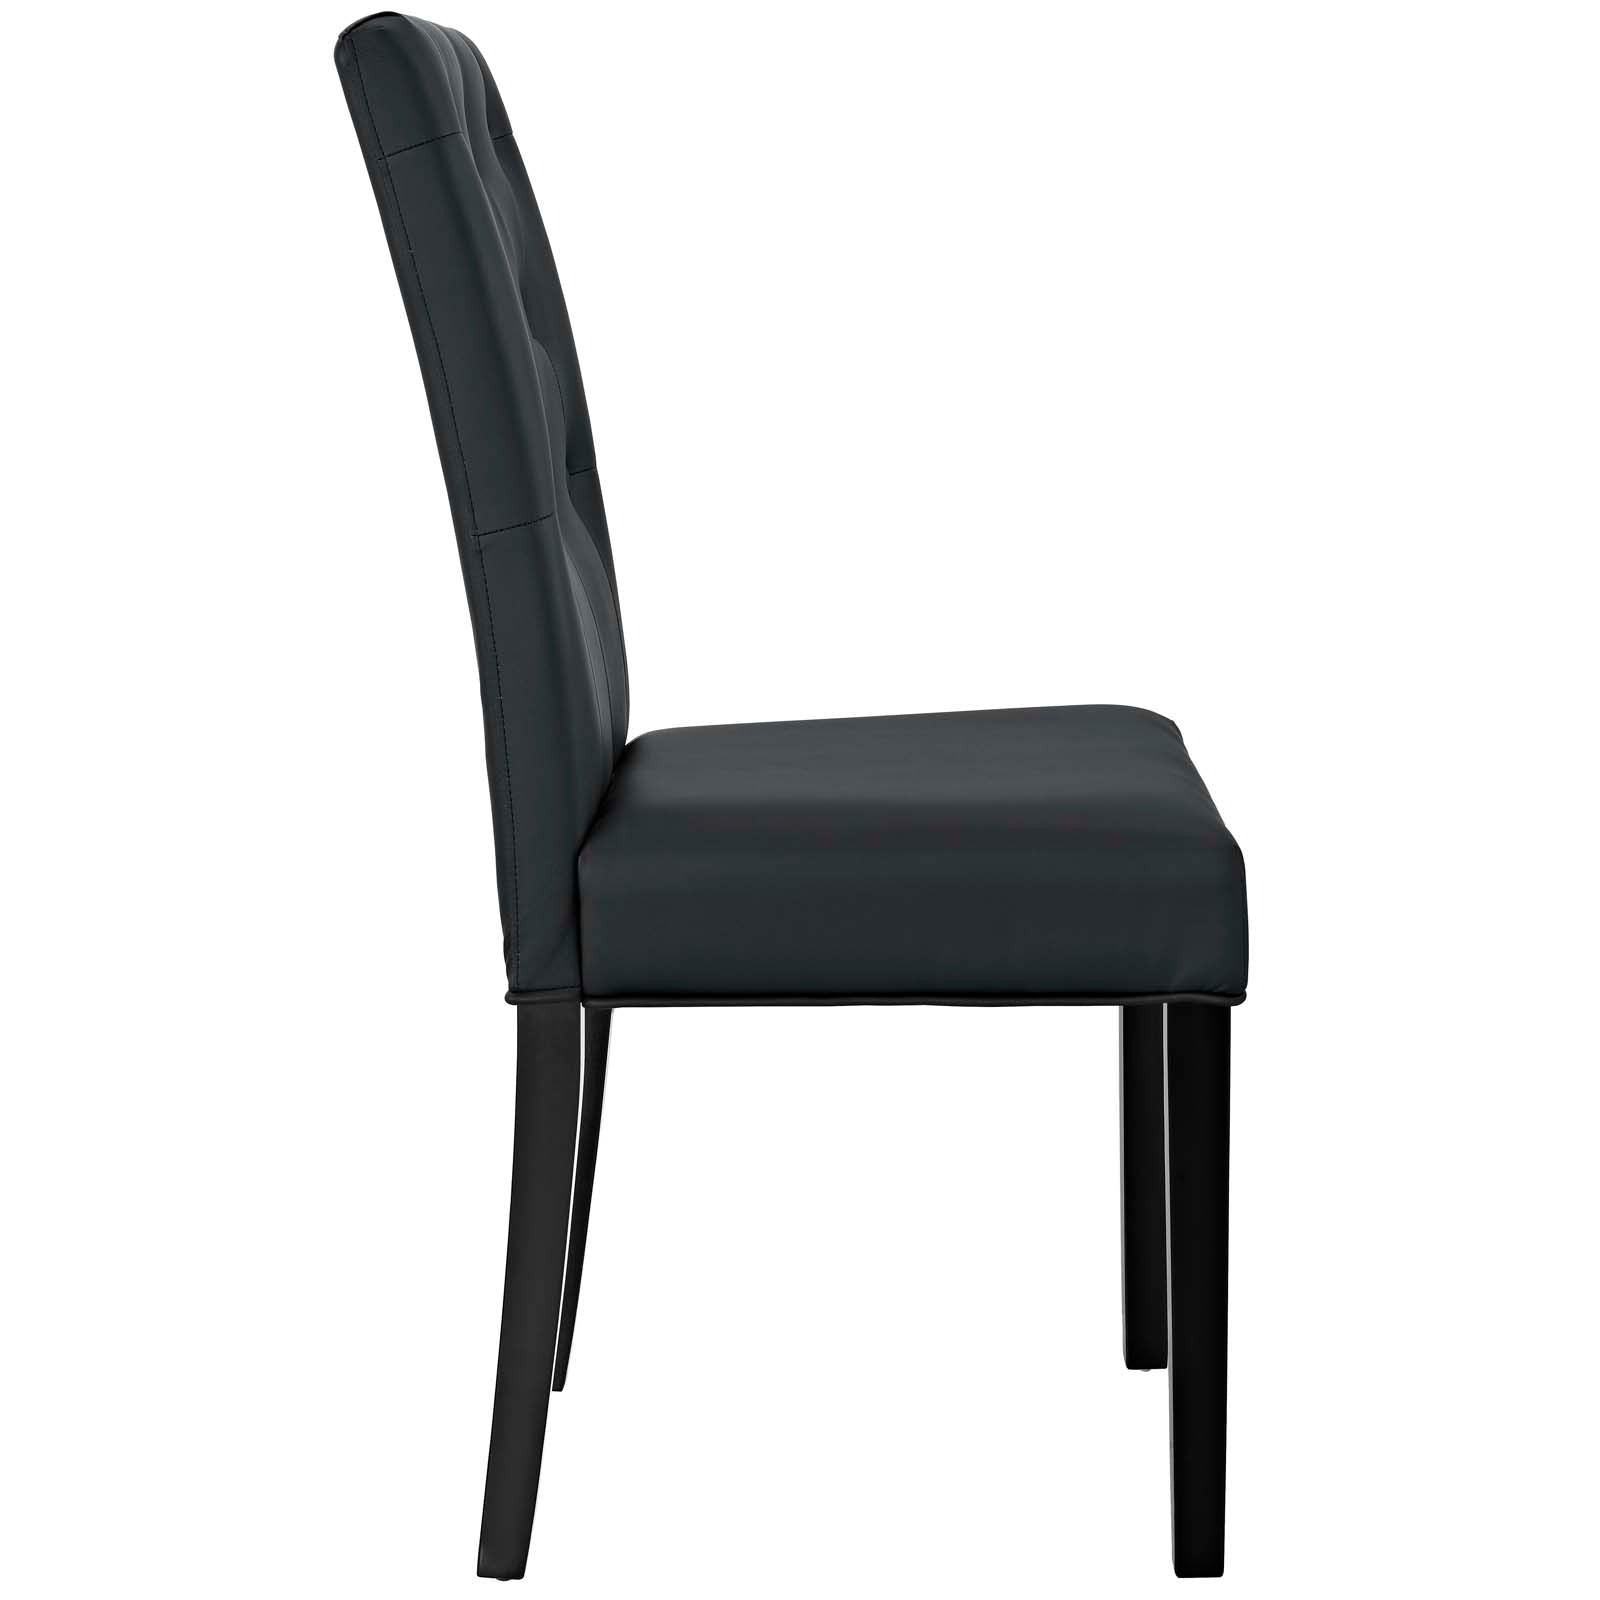 Modway Dining Chairs - Confer Dining Side Chair Vinyl Set of 4 Black